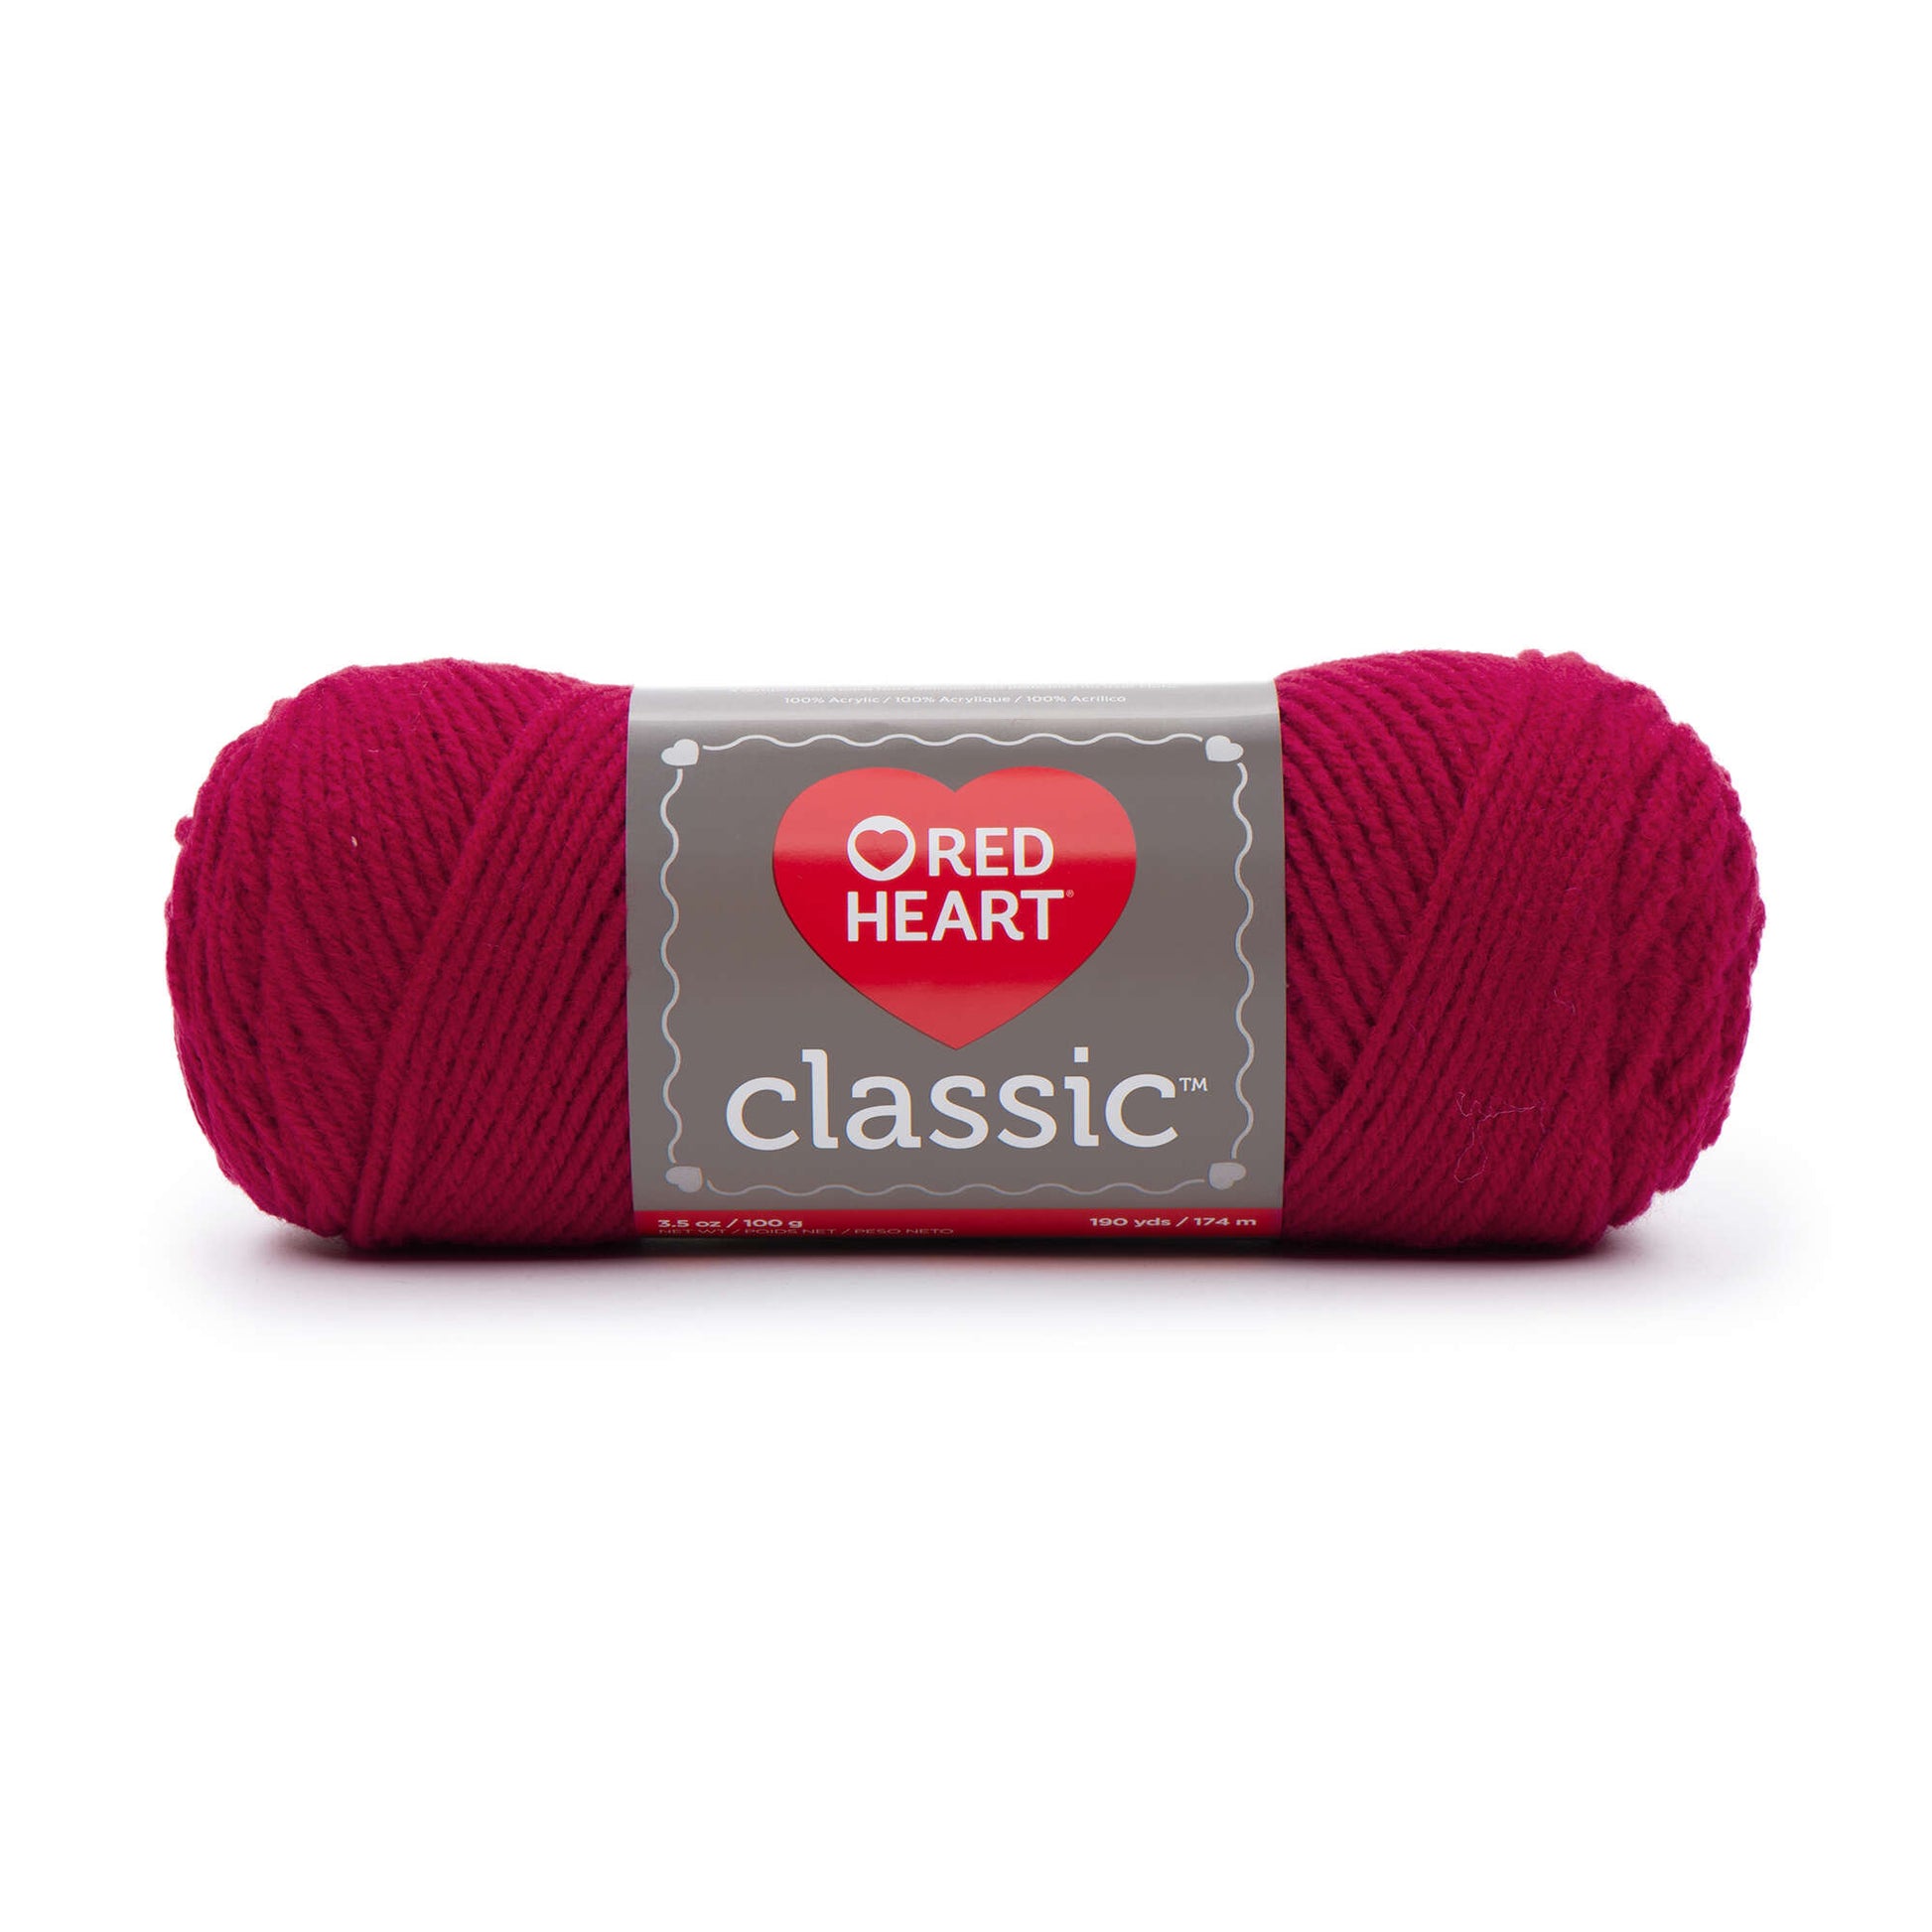 Red Heart Classic Yarn - Clearance shades Cherry Red